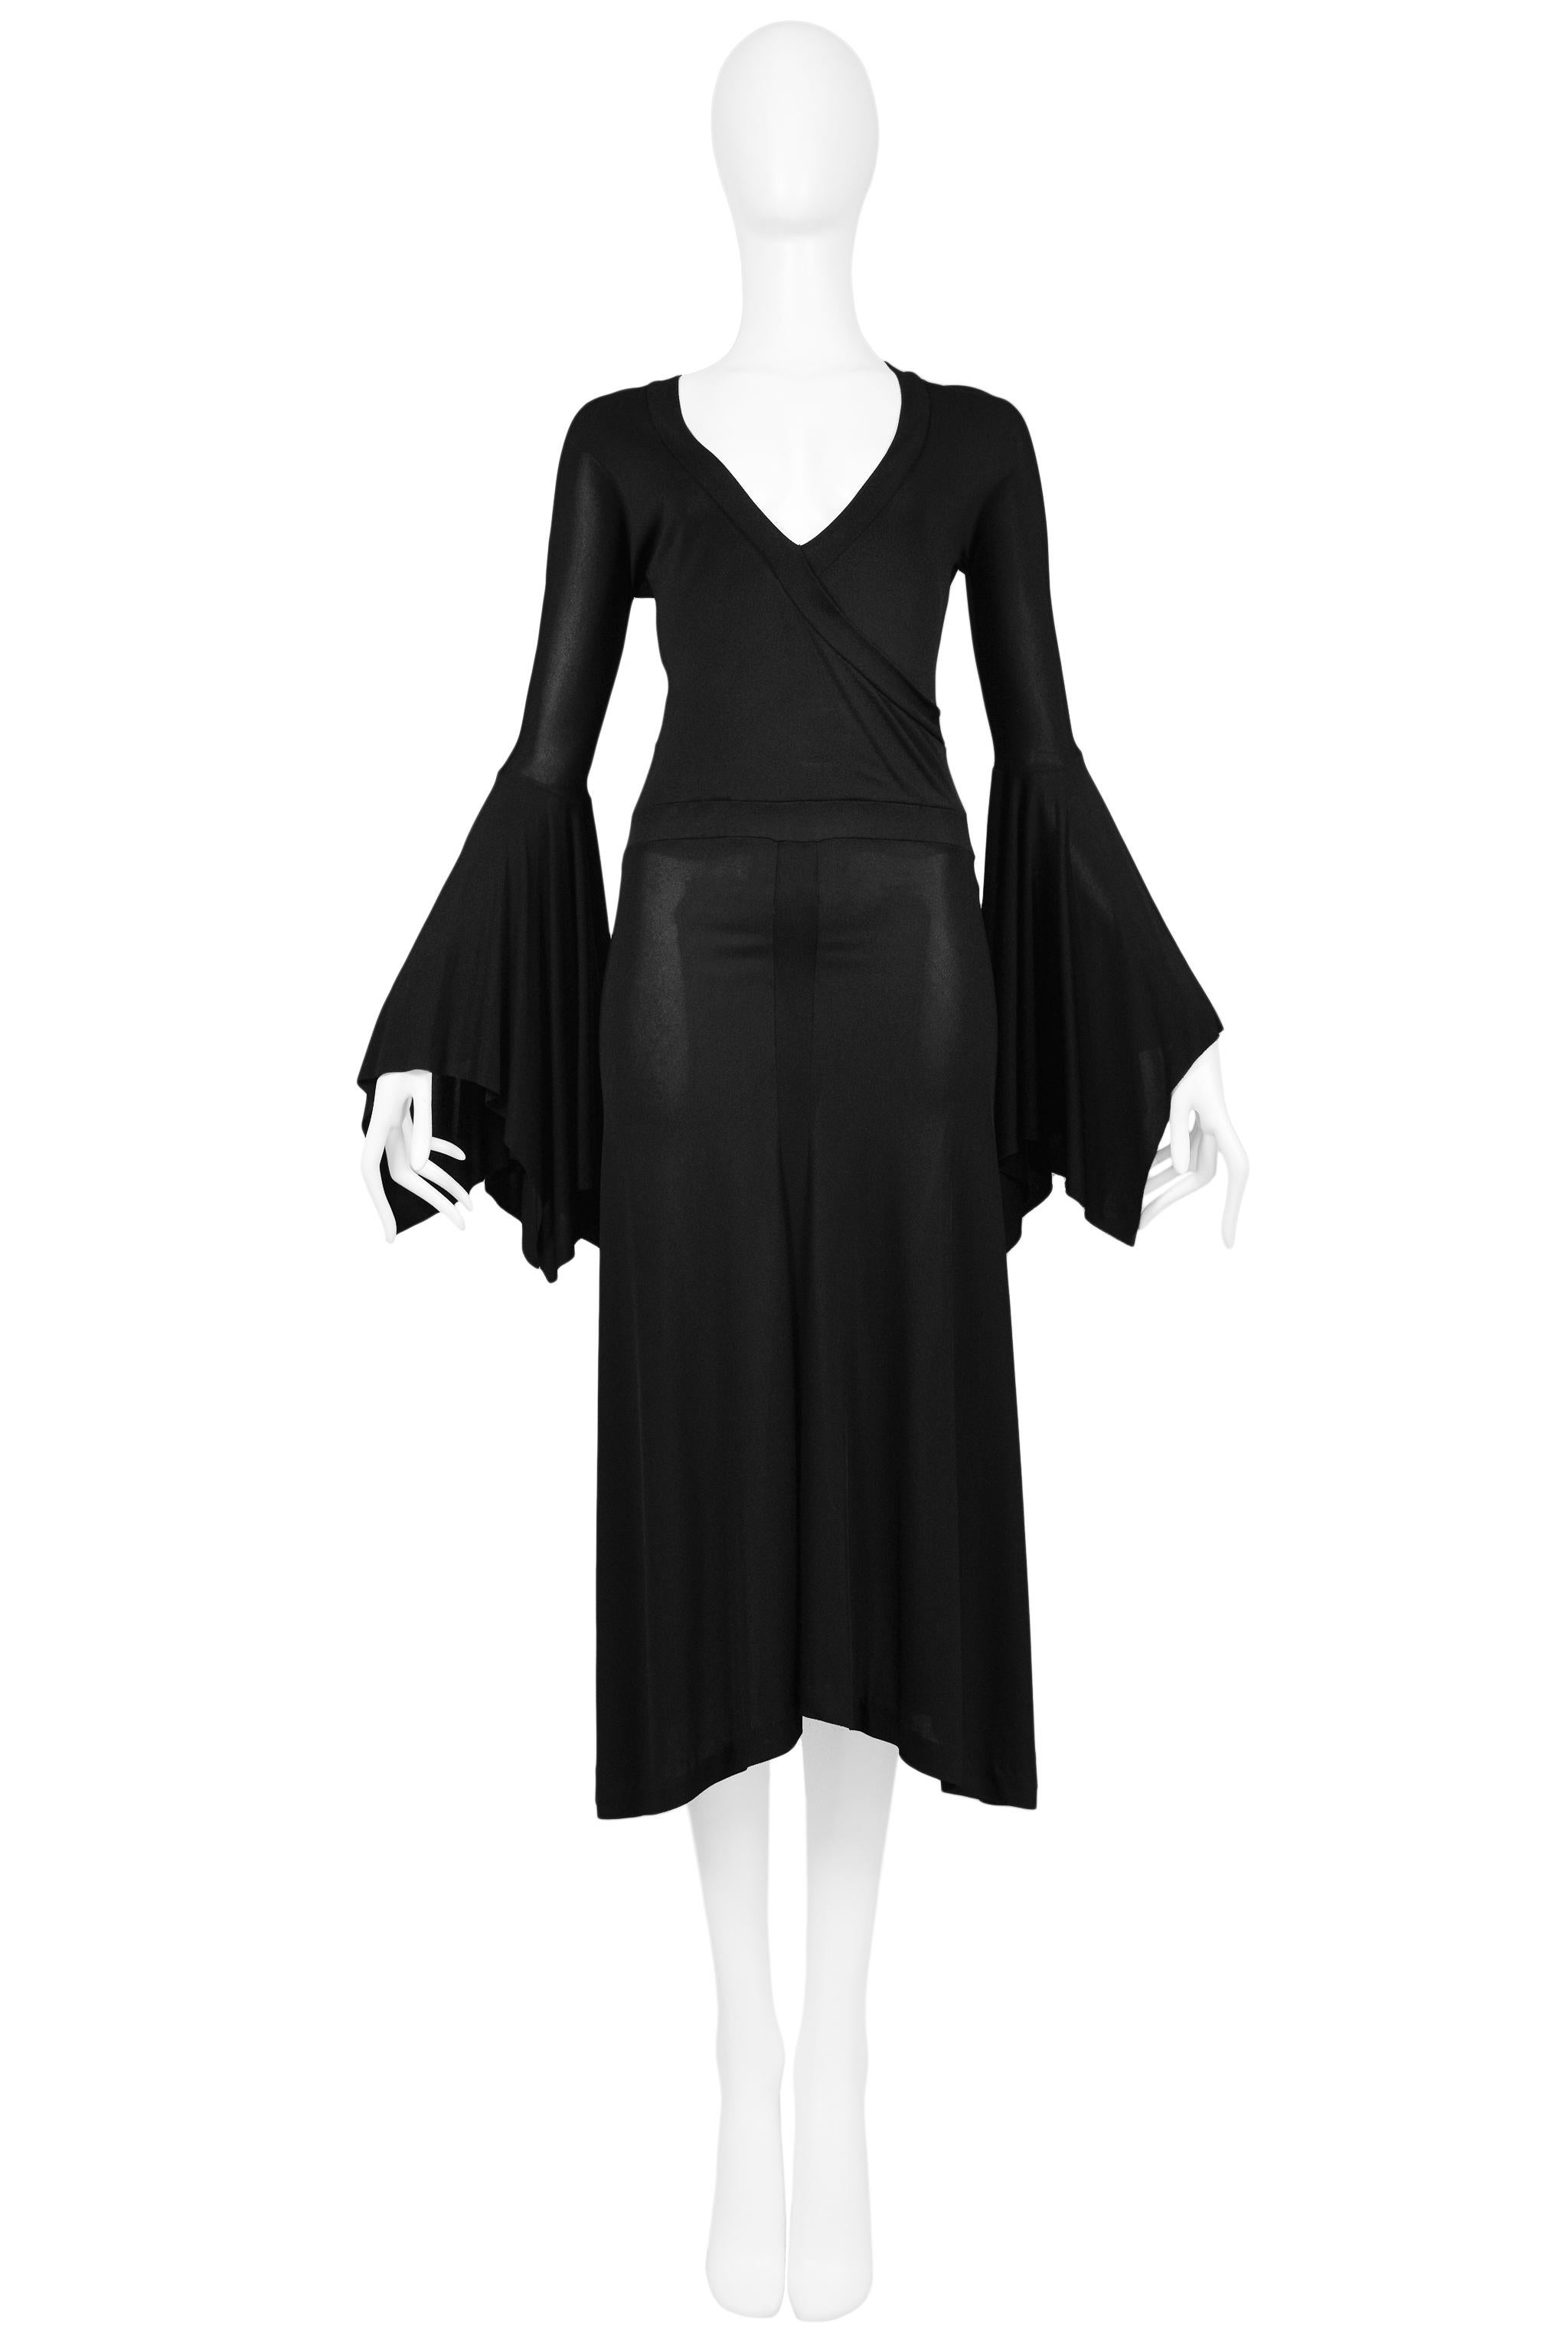 We are excited to offer a vintage Tom Ford for Yves Saint Laurent black jersey mid-length dress featuring bell sleeves and a v-neckline.

Yves Saint Laurent
Designed by Tom Ford
Size Medium
Bust 28